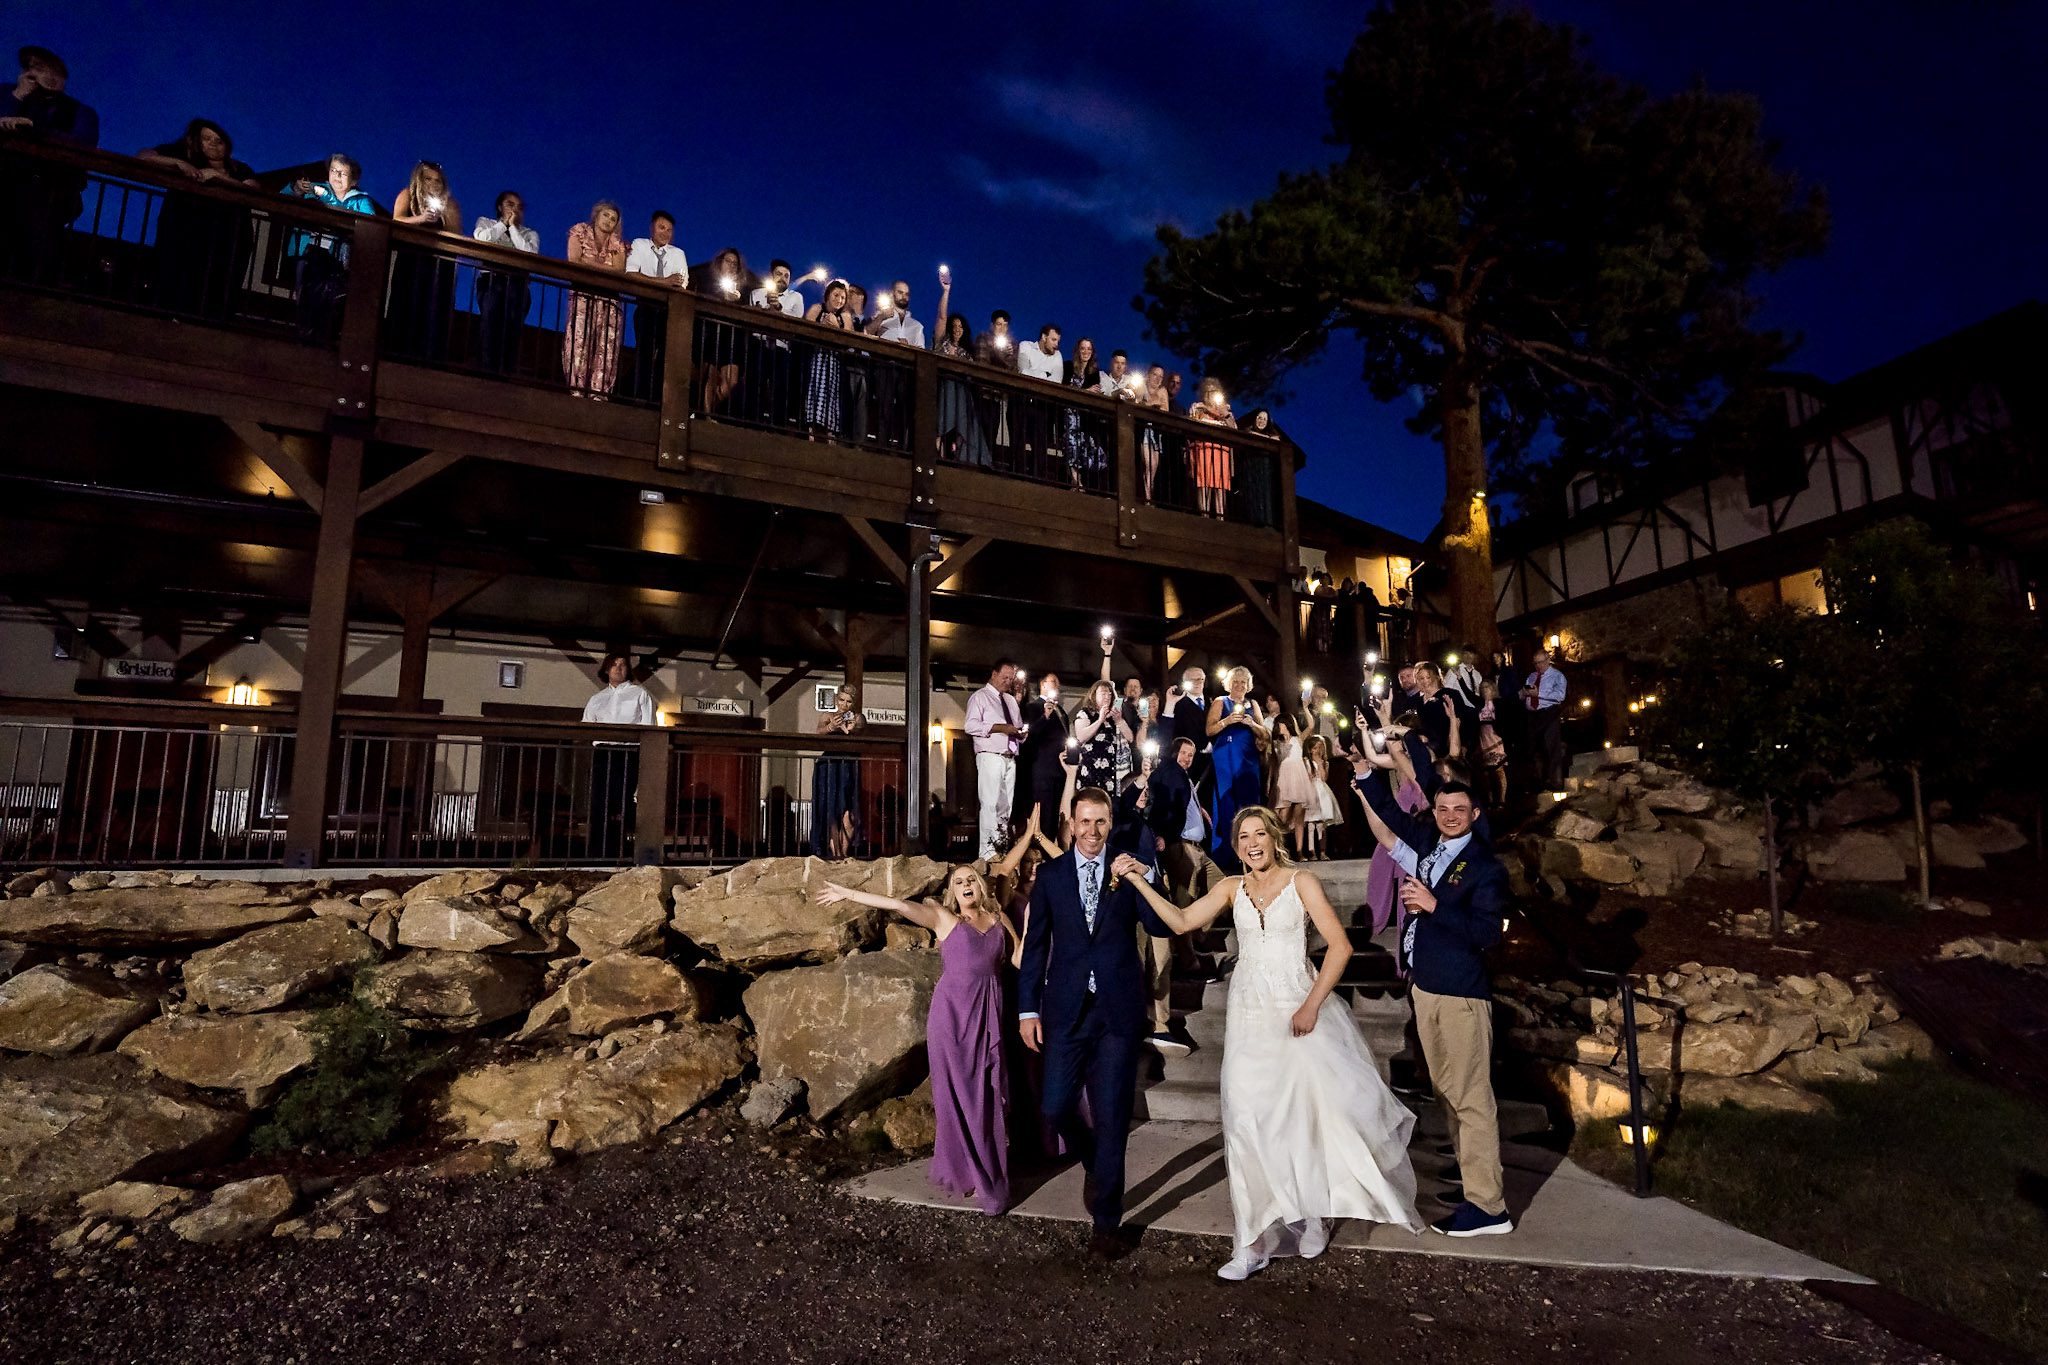 Fun and colorful summer wedding at The Landing in Estes Park Colorado by Bonnie Photo